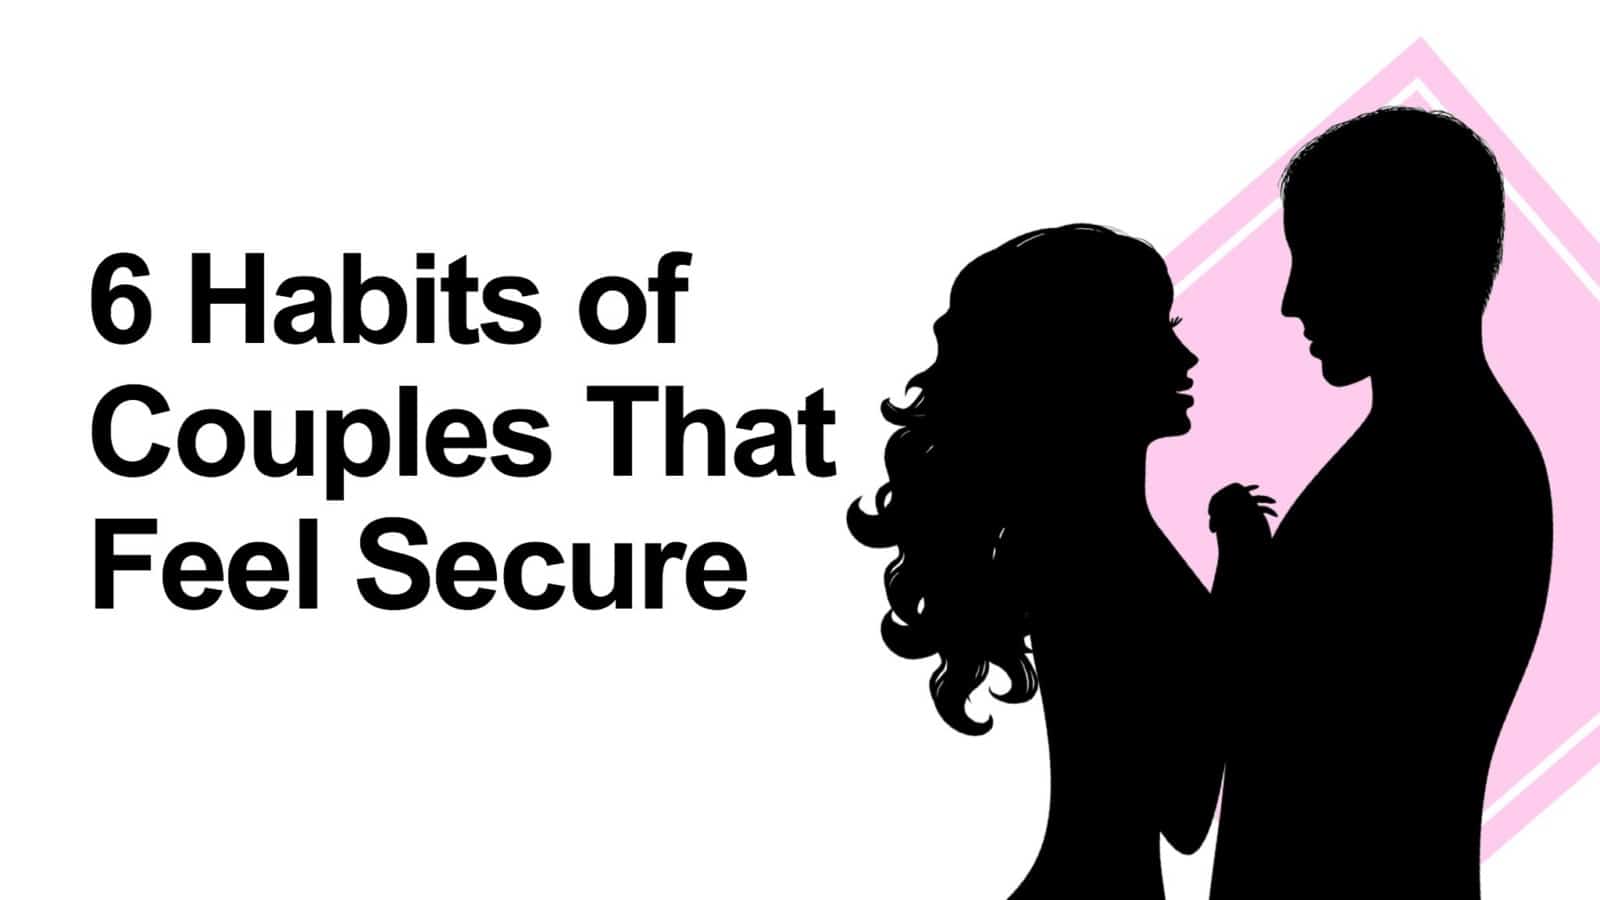 6 Habits of Couples That Feel Secure